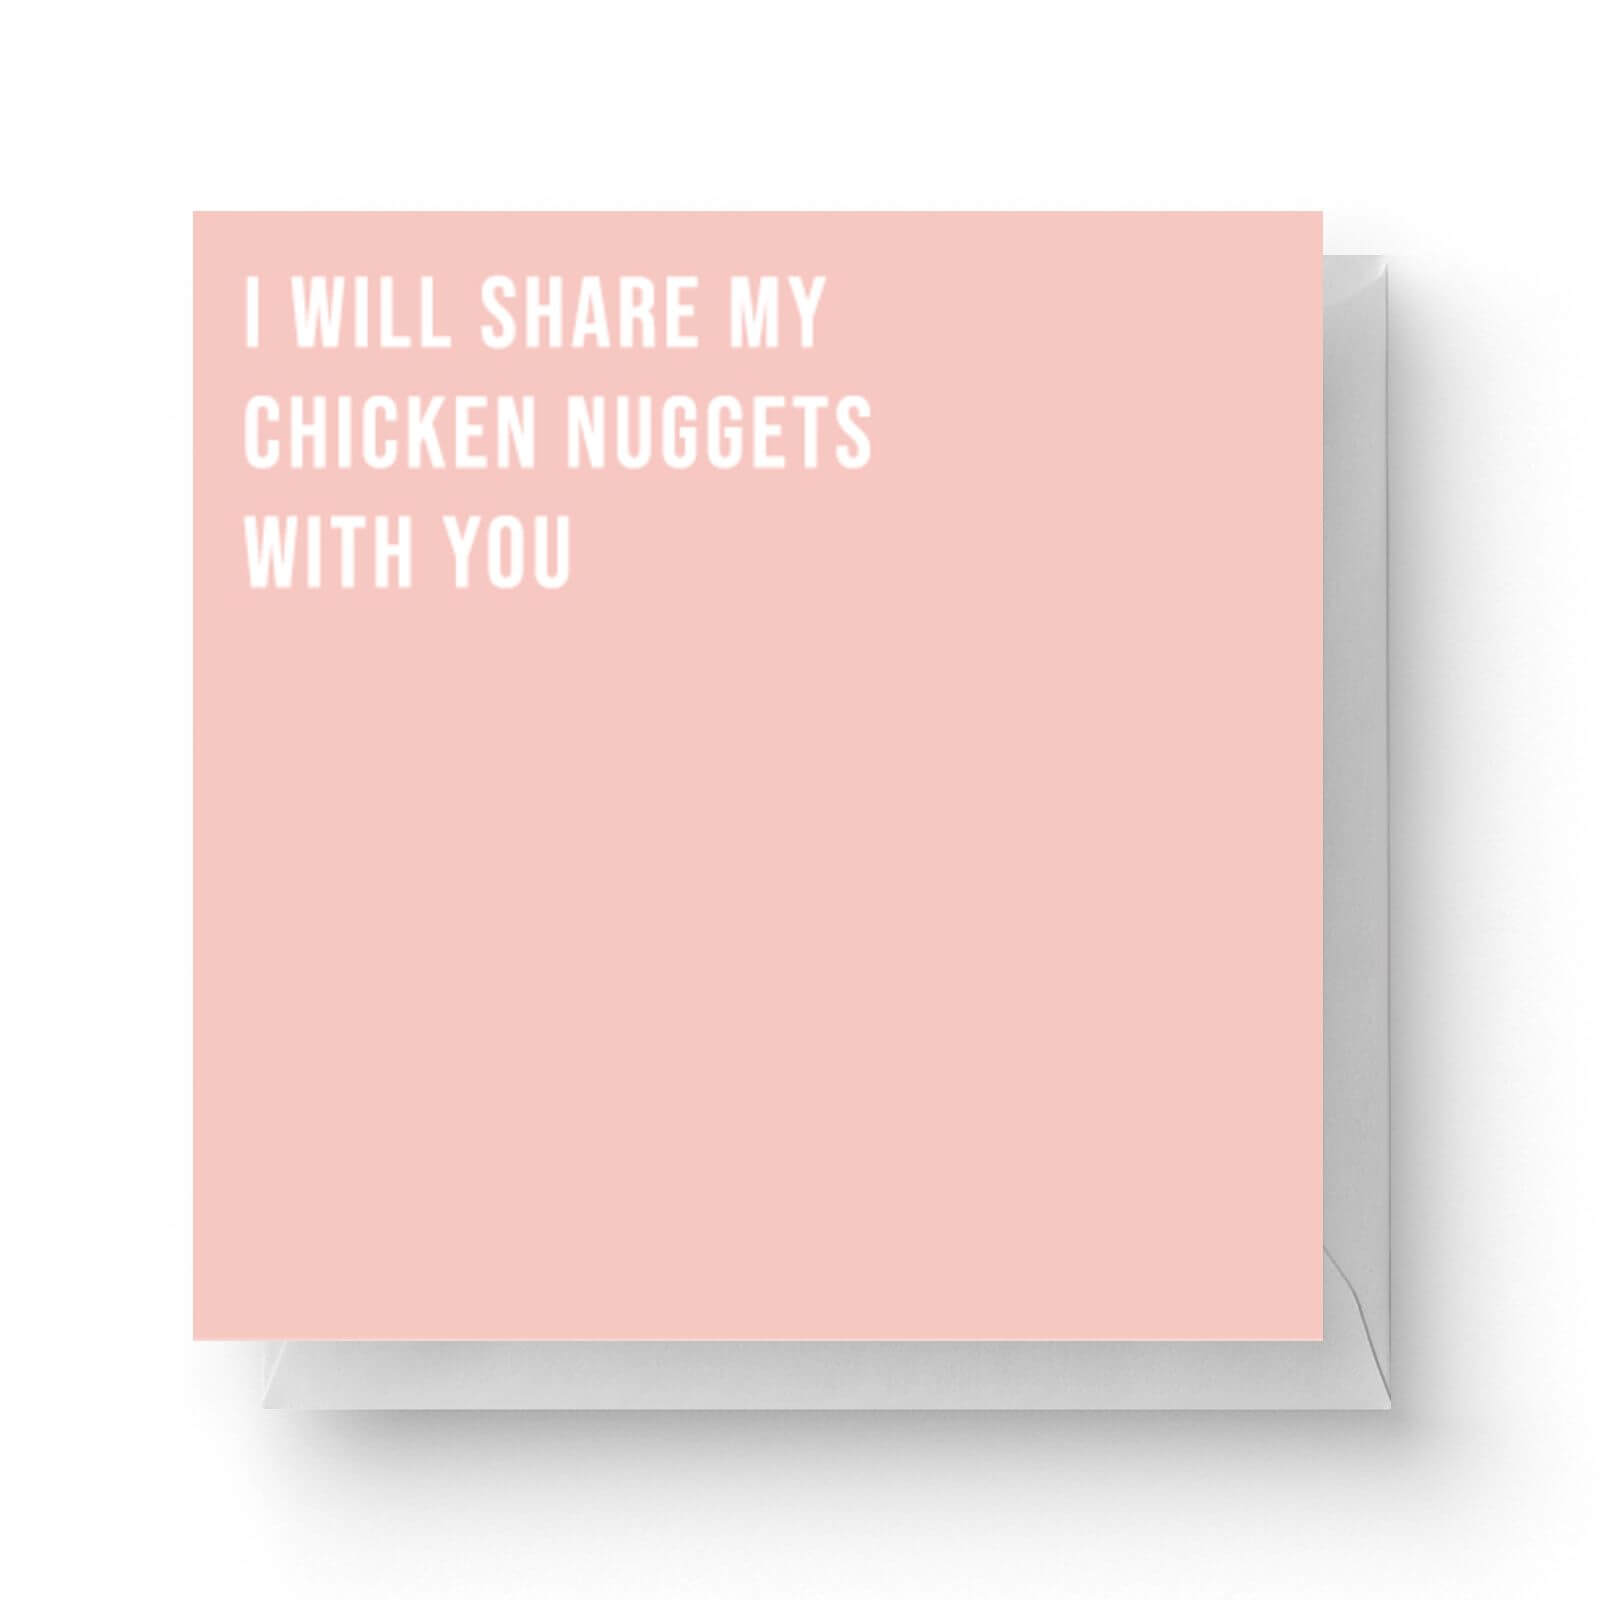 I Will Share My Chicken Nuggets With You Square Greetings Card 148cm X 148cm